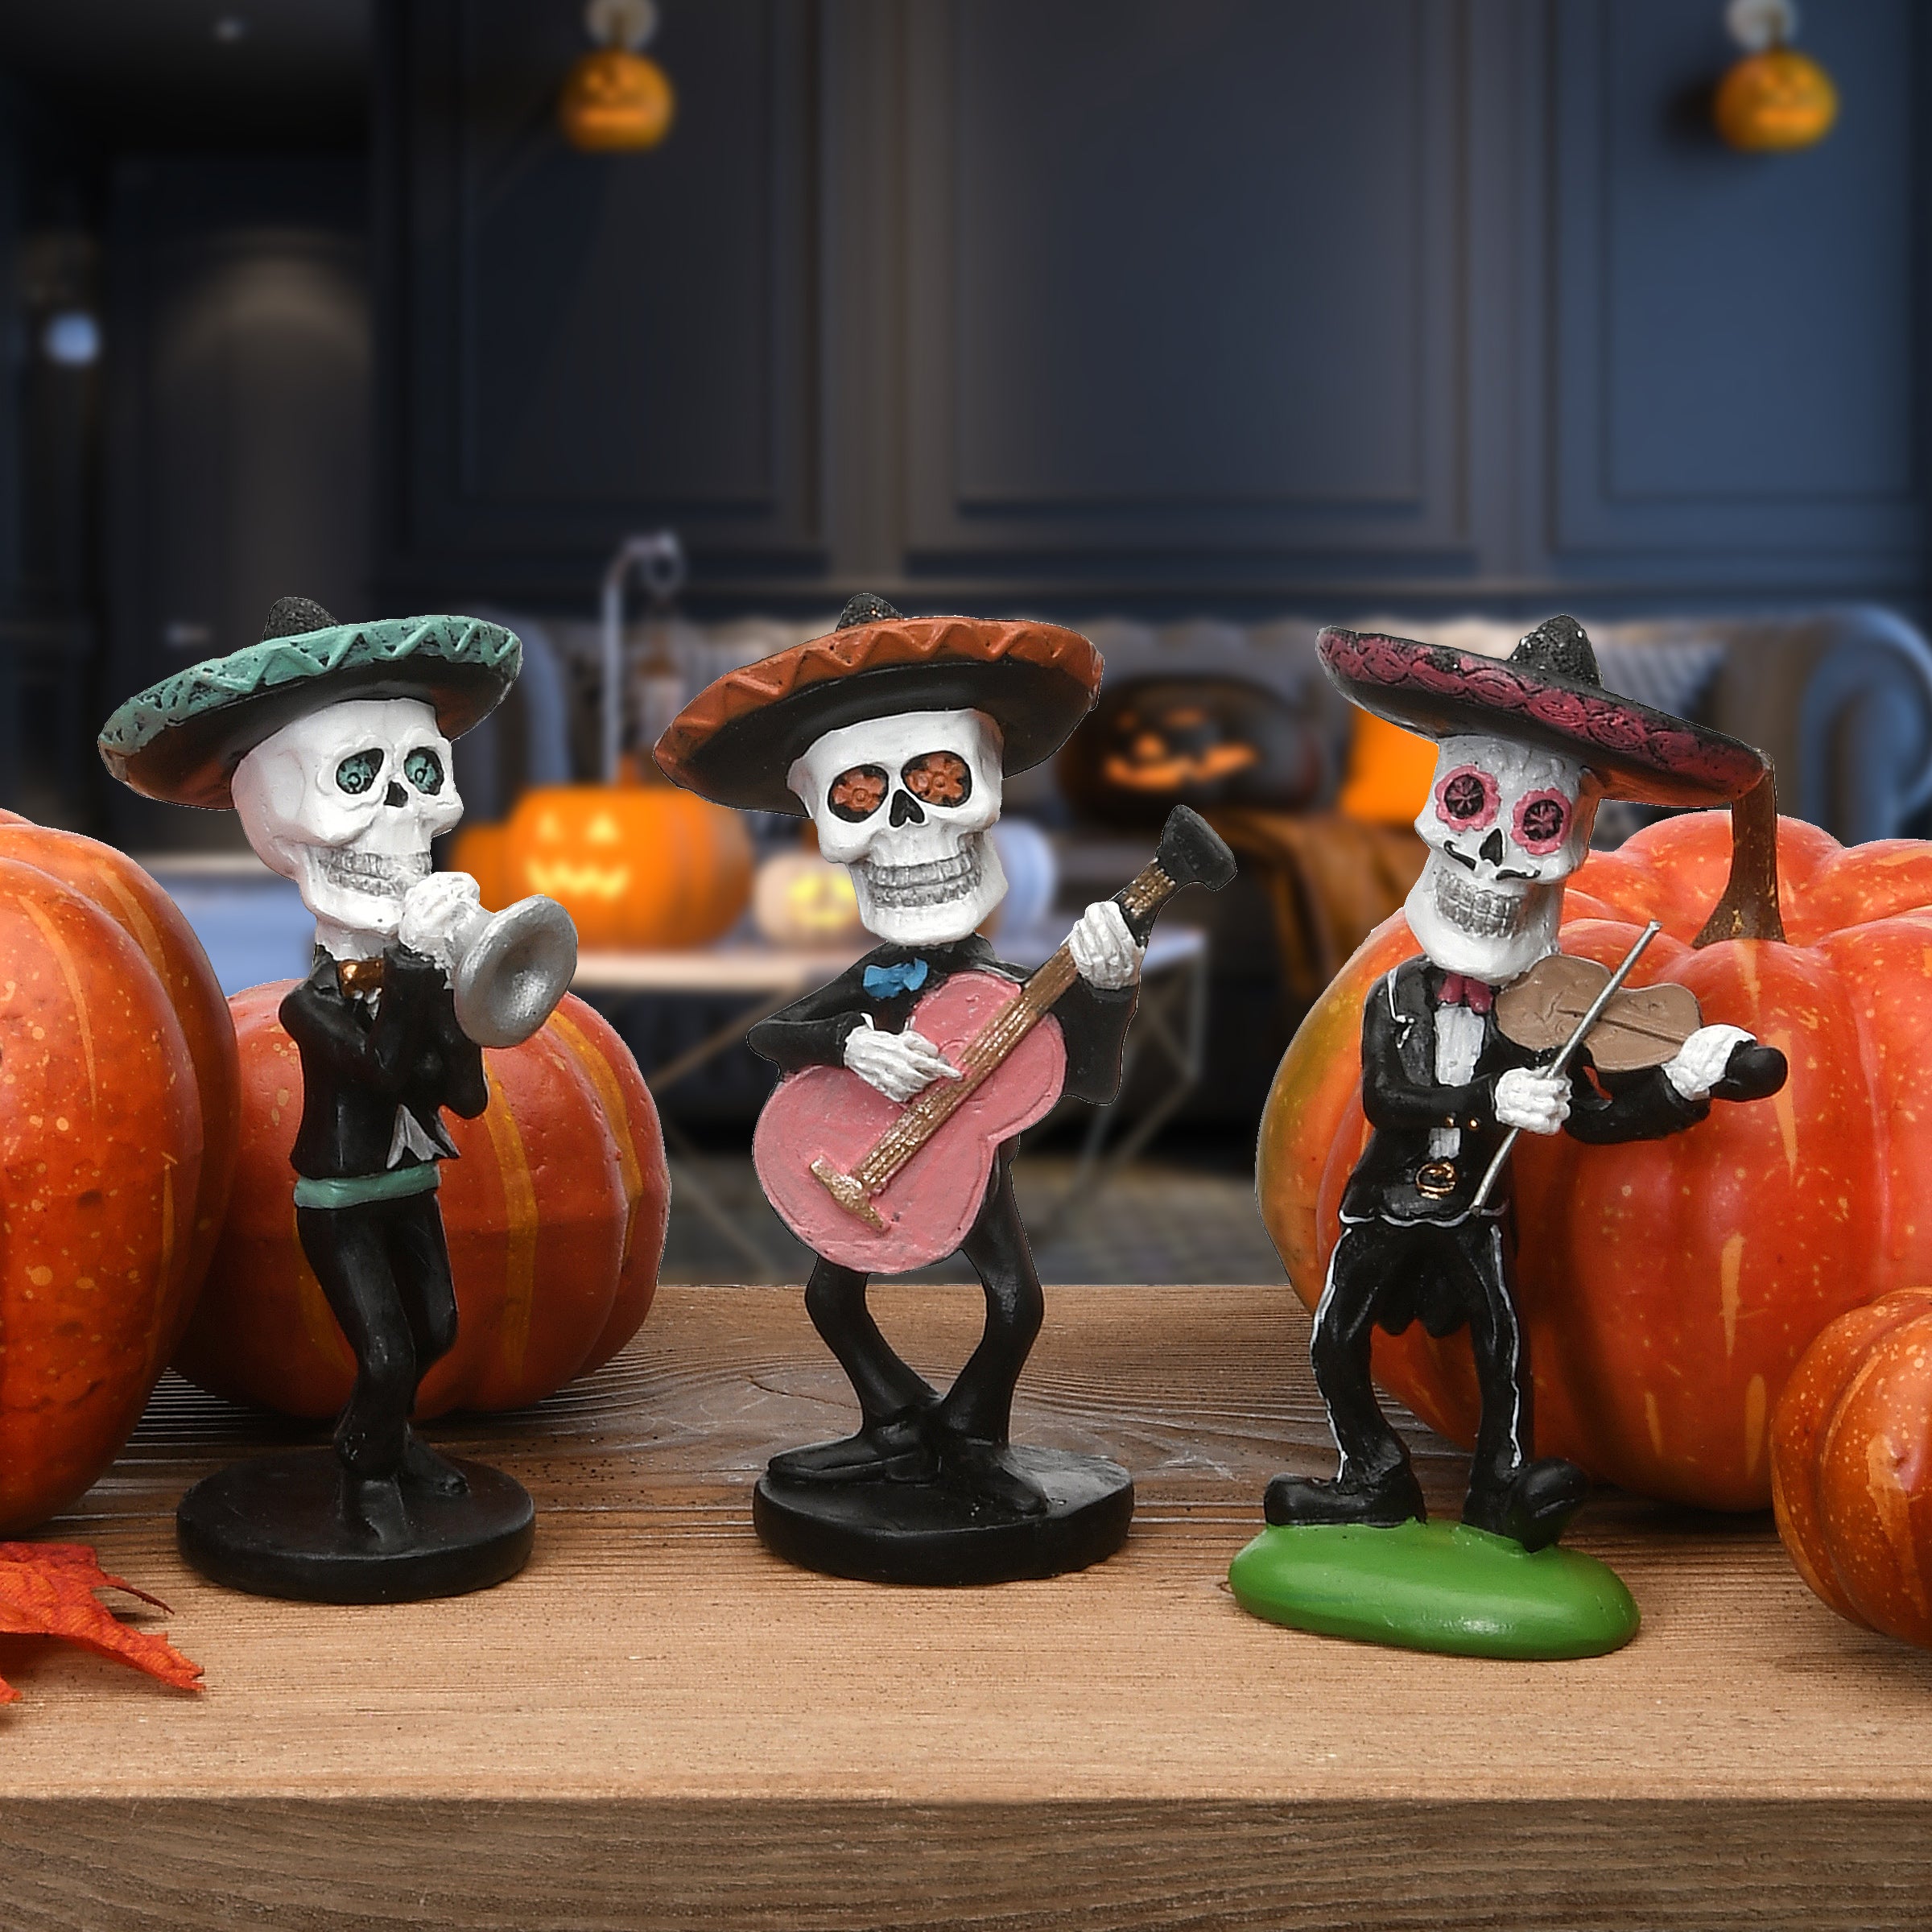 Halloween Skeleton Mariachi Band, Includes Guitarist, Violinist, Trumpet Player, 4 Inches